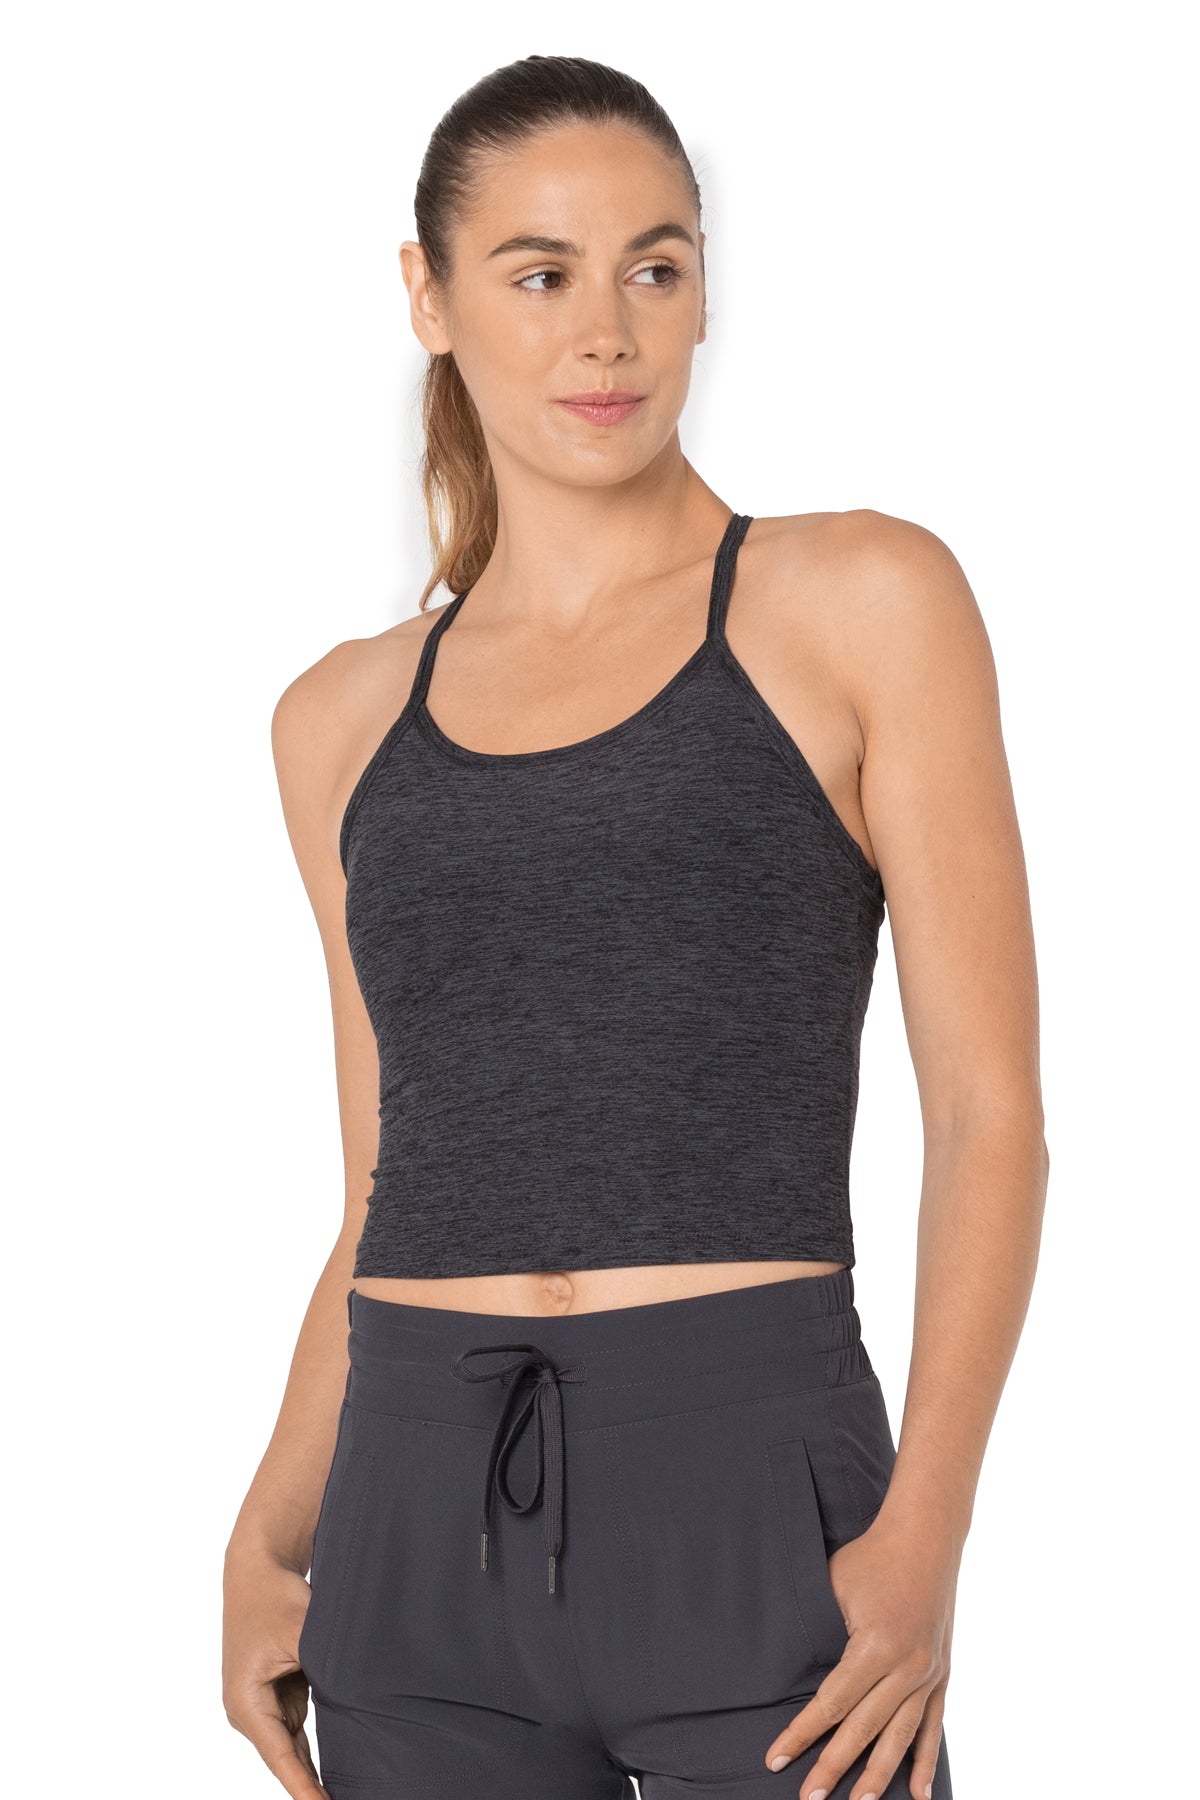  Kyodan Women's Racerback Tank Top with Built in Bra Black  X-Small : Clothing, Shoes & Jewelry